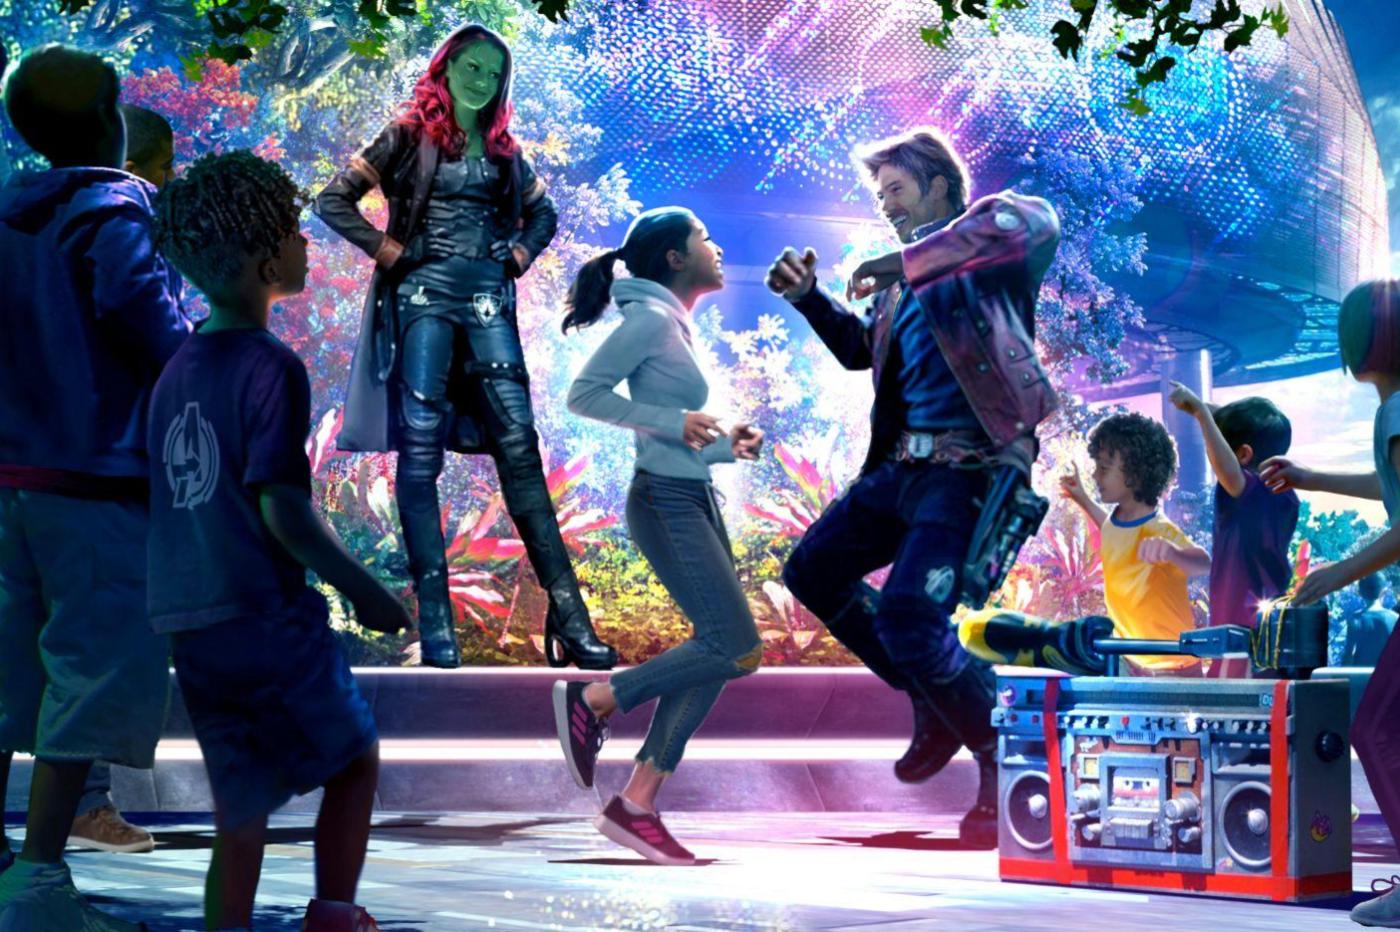 Promotional image of the show Guardians of the galaxy dance off which will return to the avengers campus